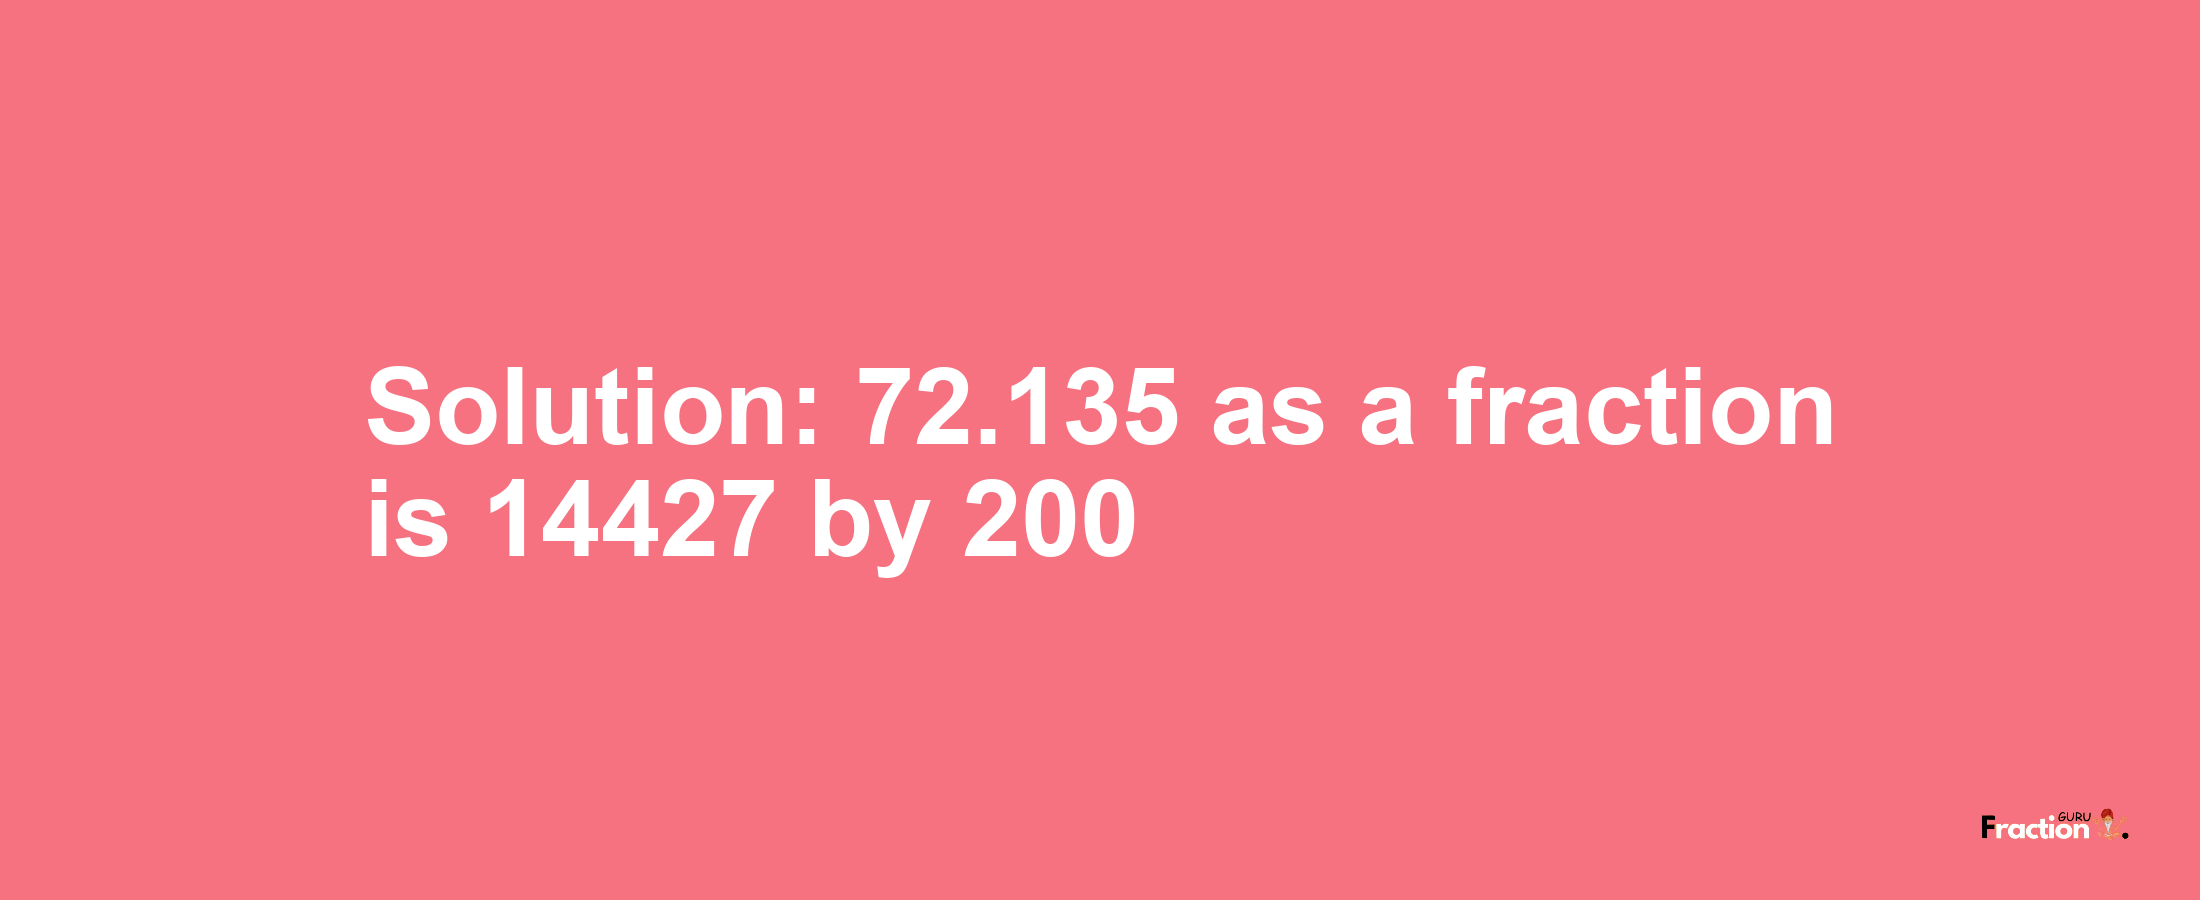 Solution:72.135 as a fraction is 14427/200